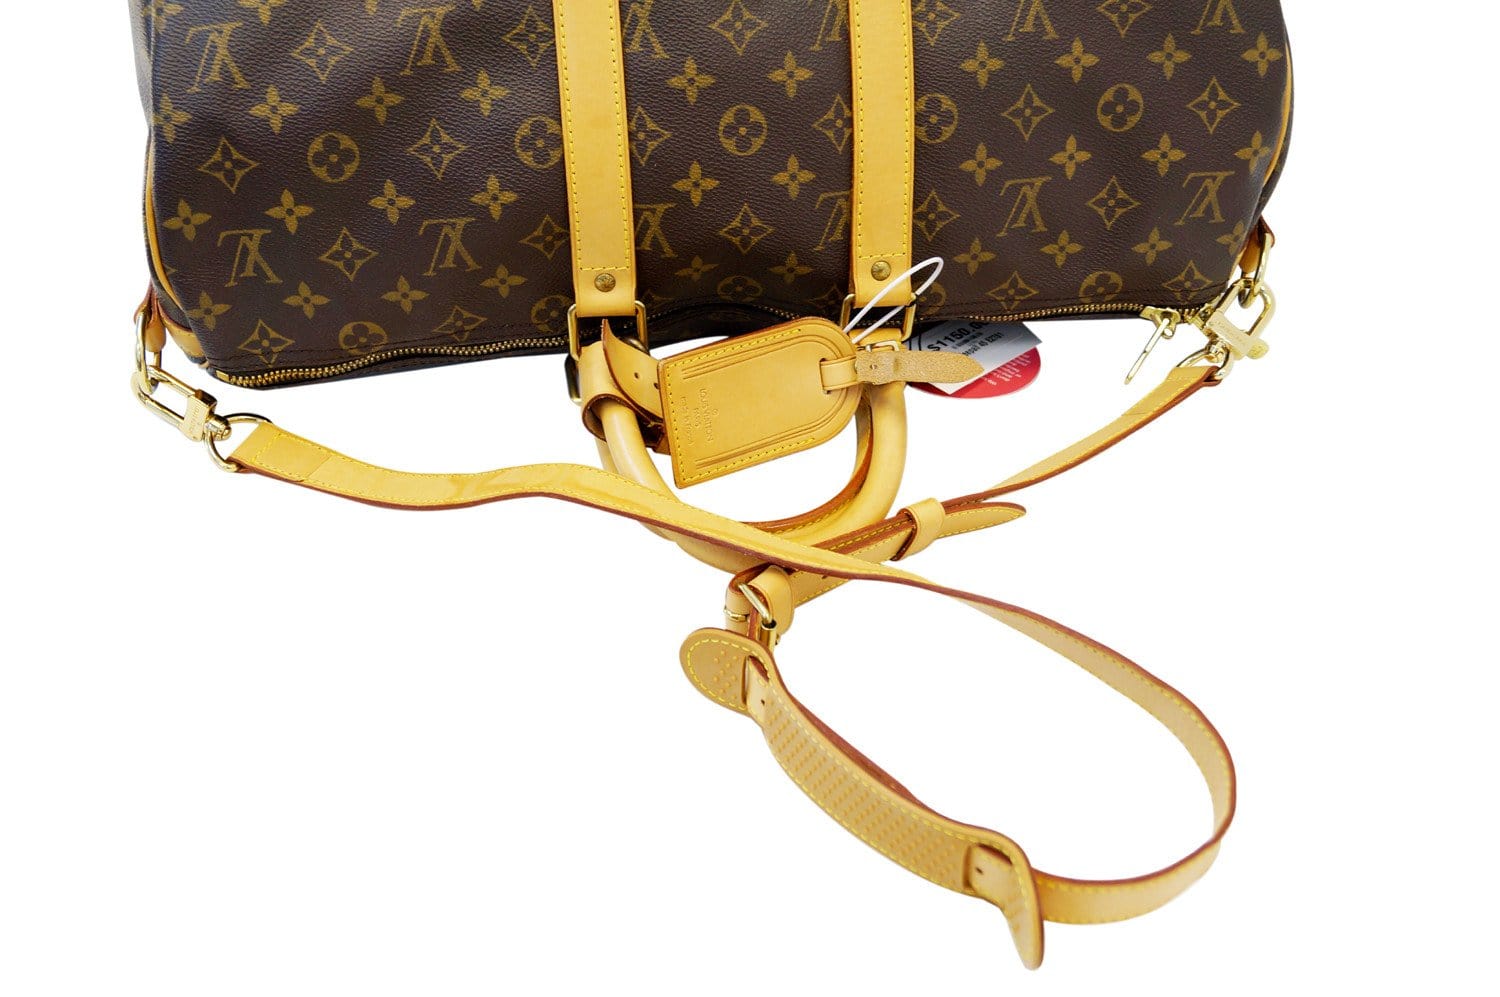 Buy Louis Vuitton monogram LOUIS VUITTON Keepall Bandouliere 45 Monogram  M41418 Boston Bag Brown / 250481 [Used] from Japan - Buy authentic Plus  exclusive items from Japan